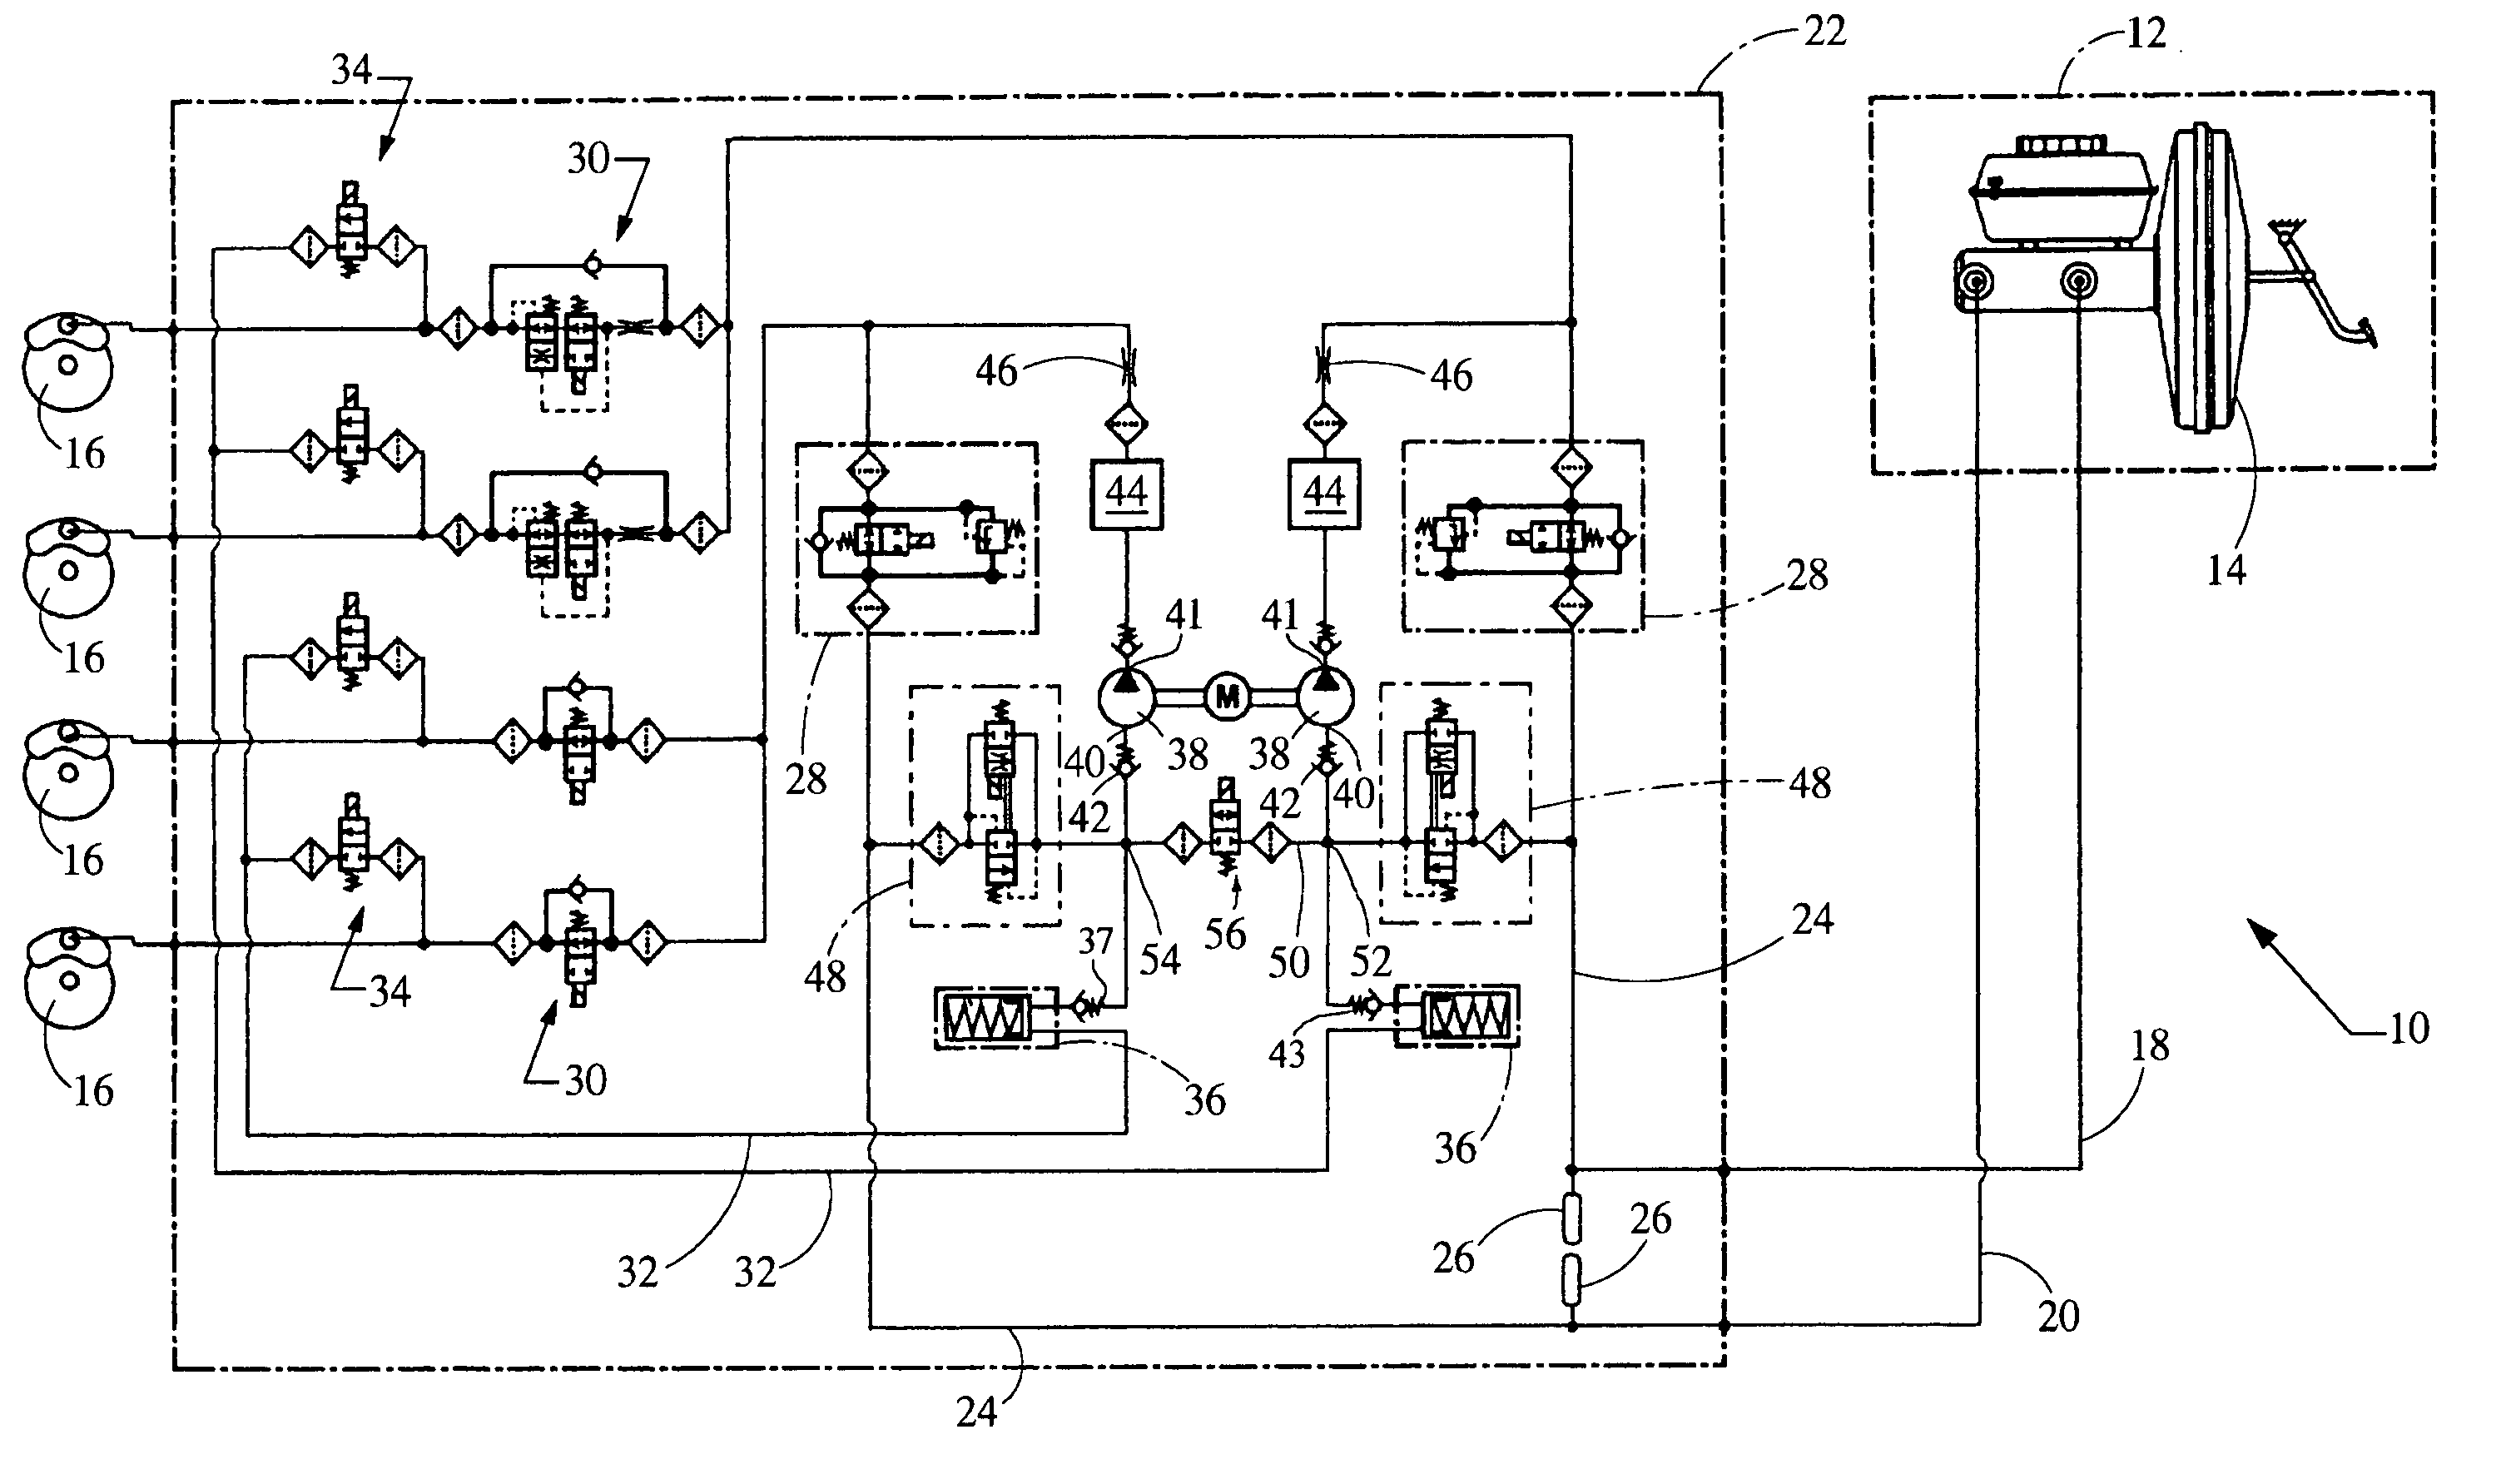 Hydraulic braking system featuring selectively-coupled pump suction circuits